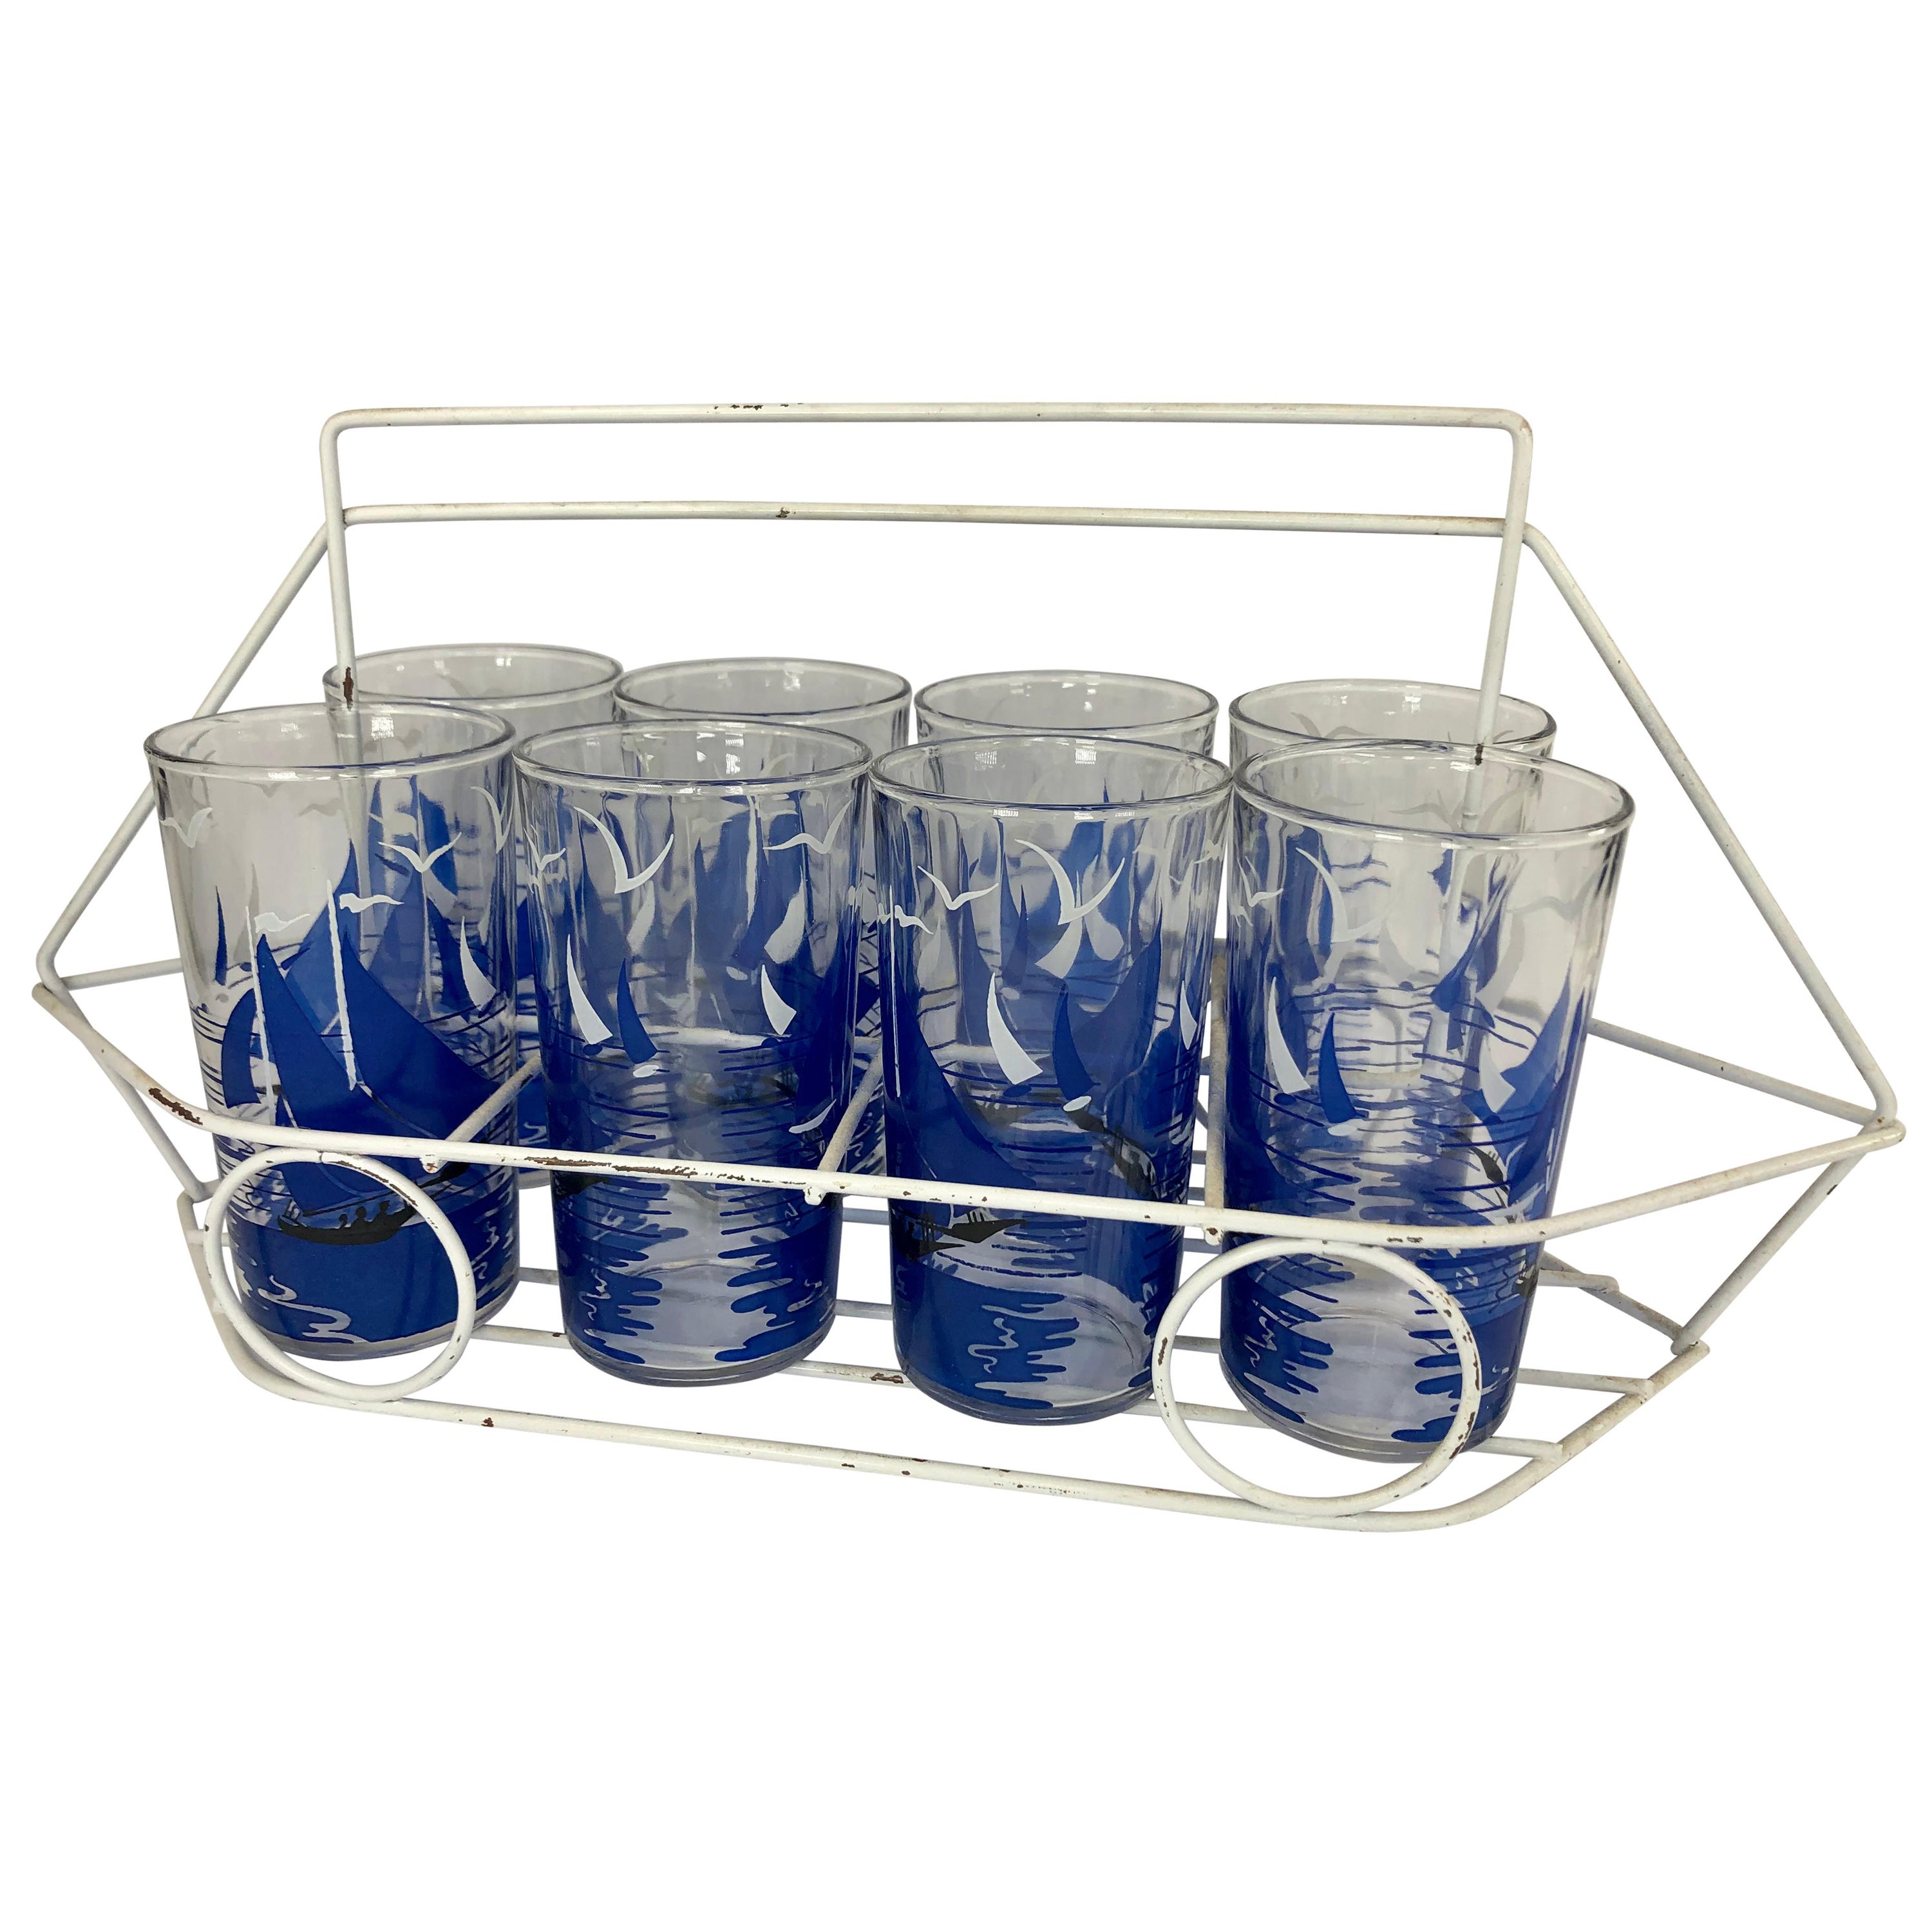 Set of 8 Vintage Mid Century Tumblers With Sailboats in Boat-Shaped Caddy For Sale